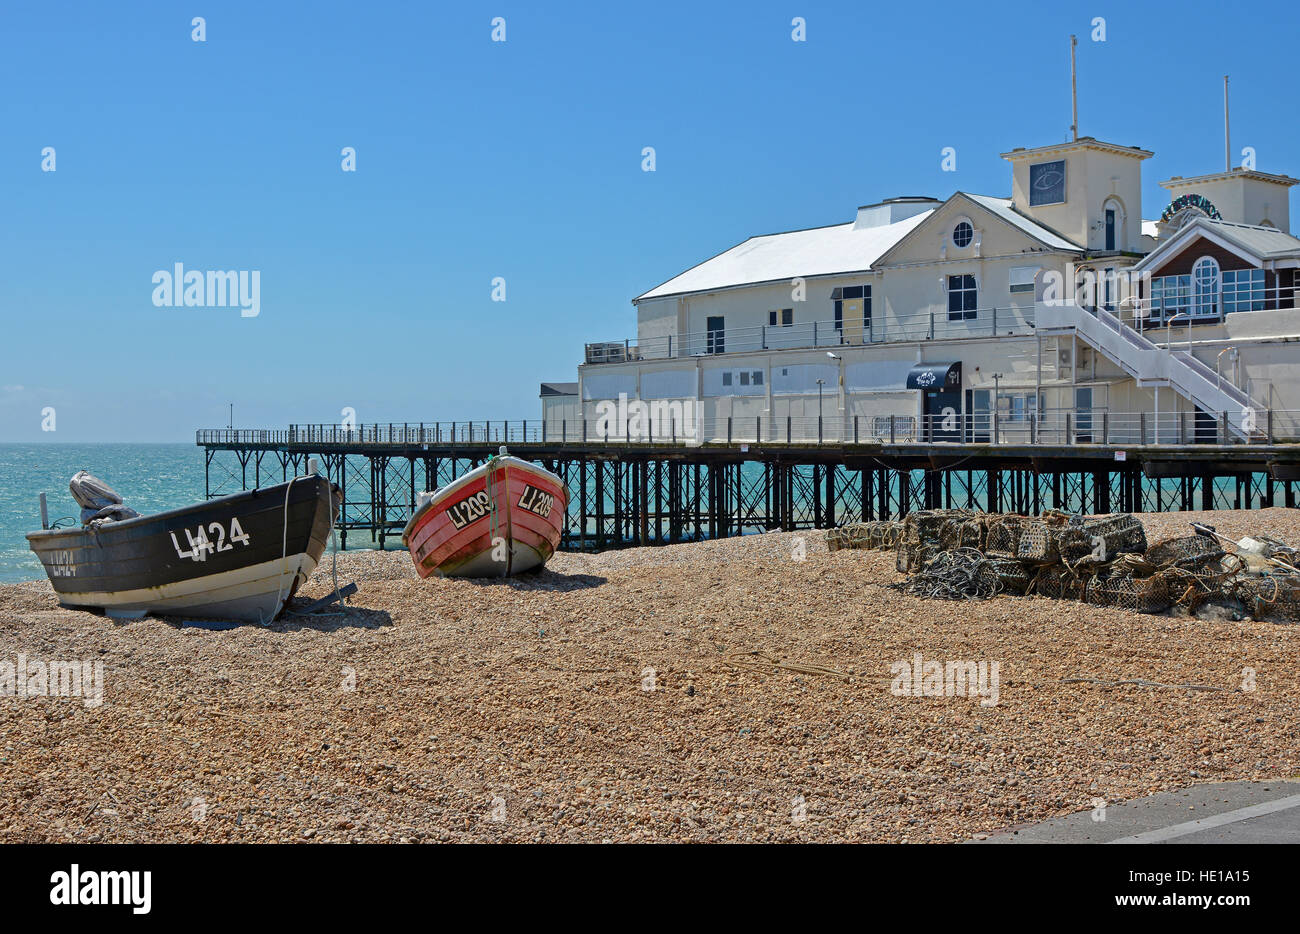 Seafront, shingle beach and pier at Bognor Regis in West Sussex, England Stock Photo